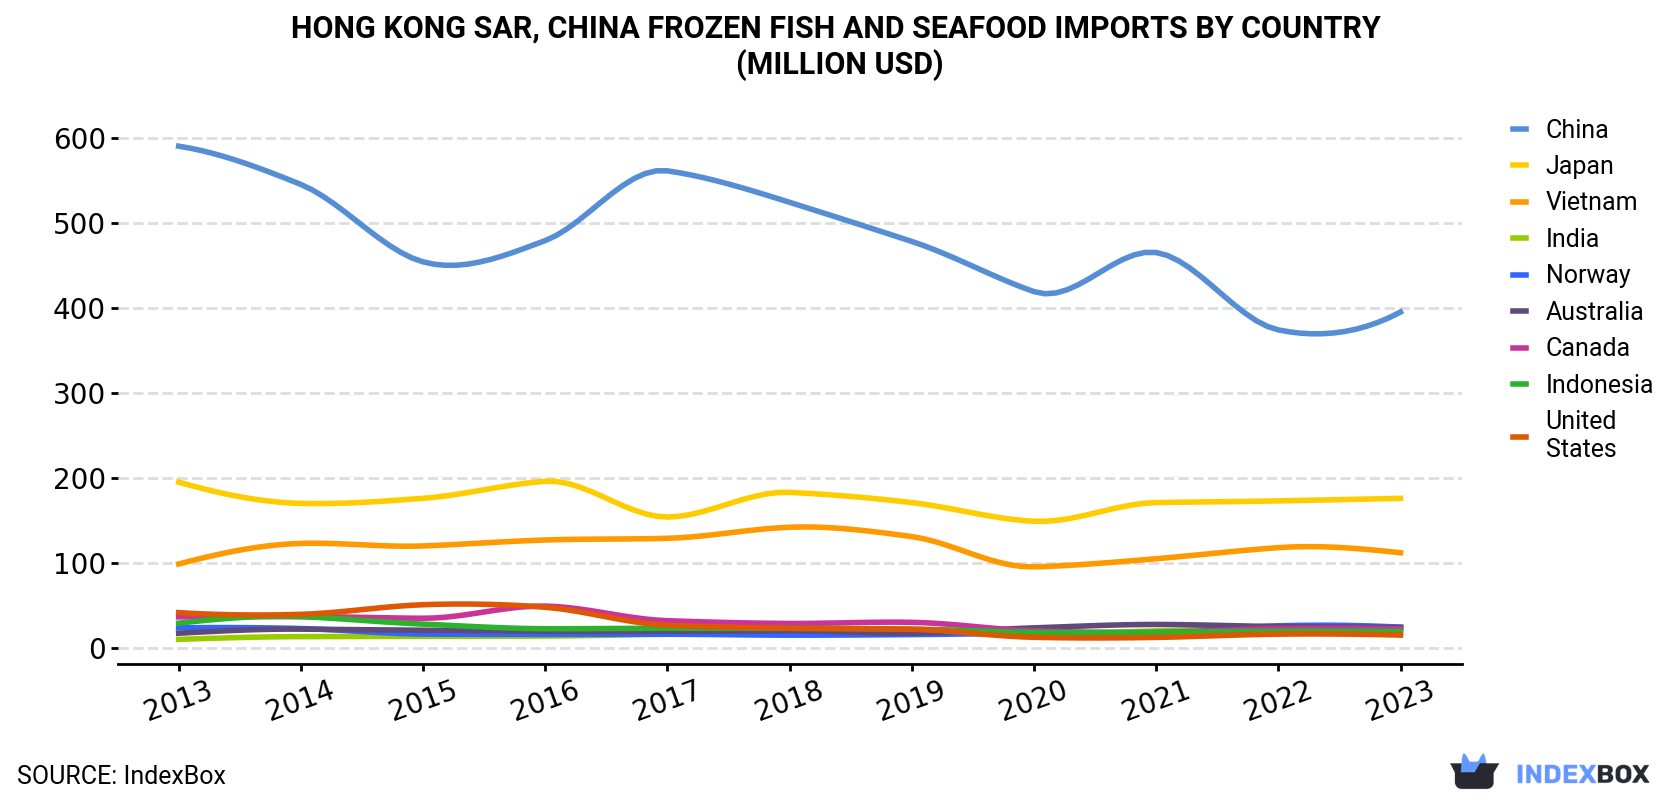 Hong Kong Frozen Fish and Seafood Imports By Country (Million USD)